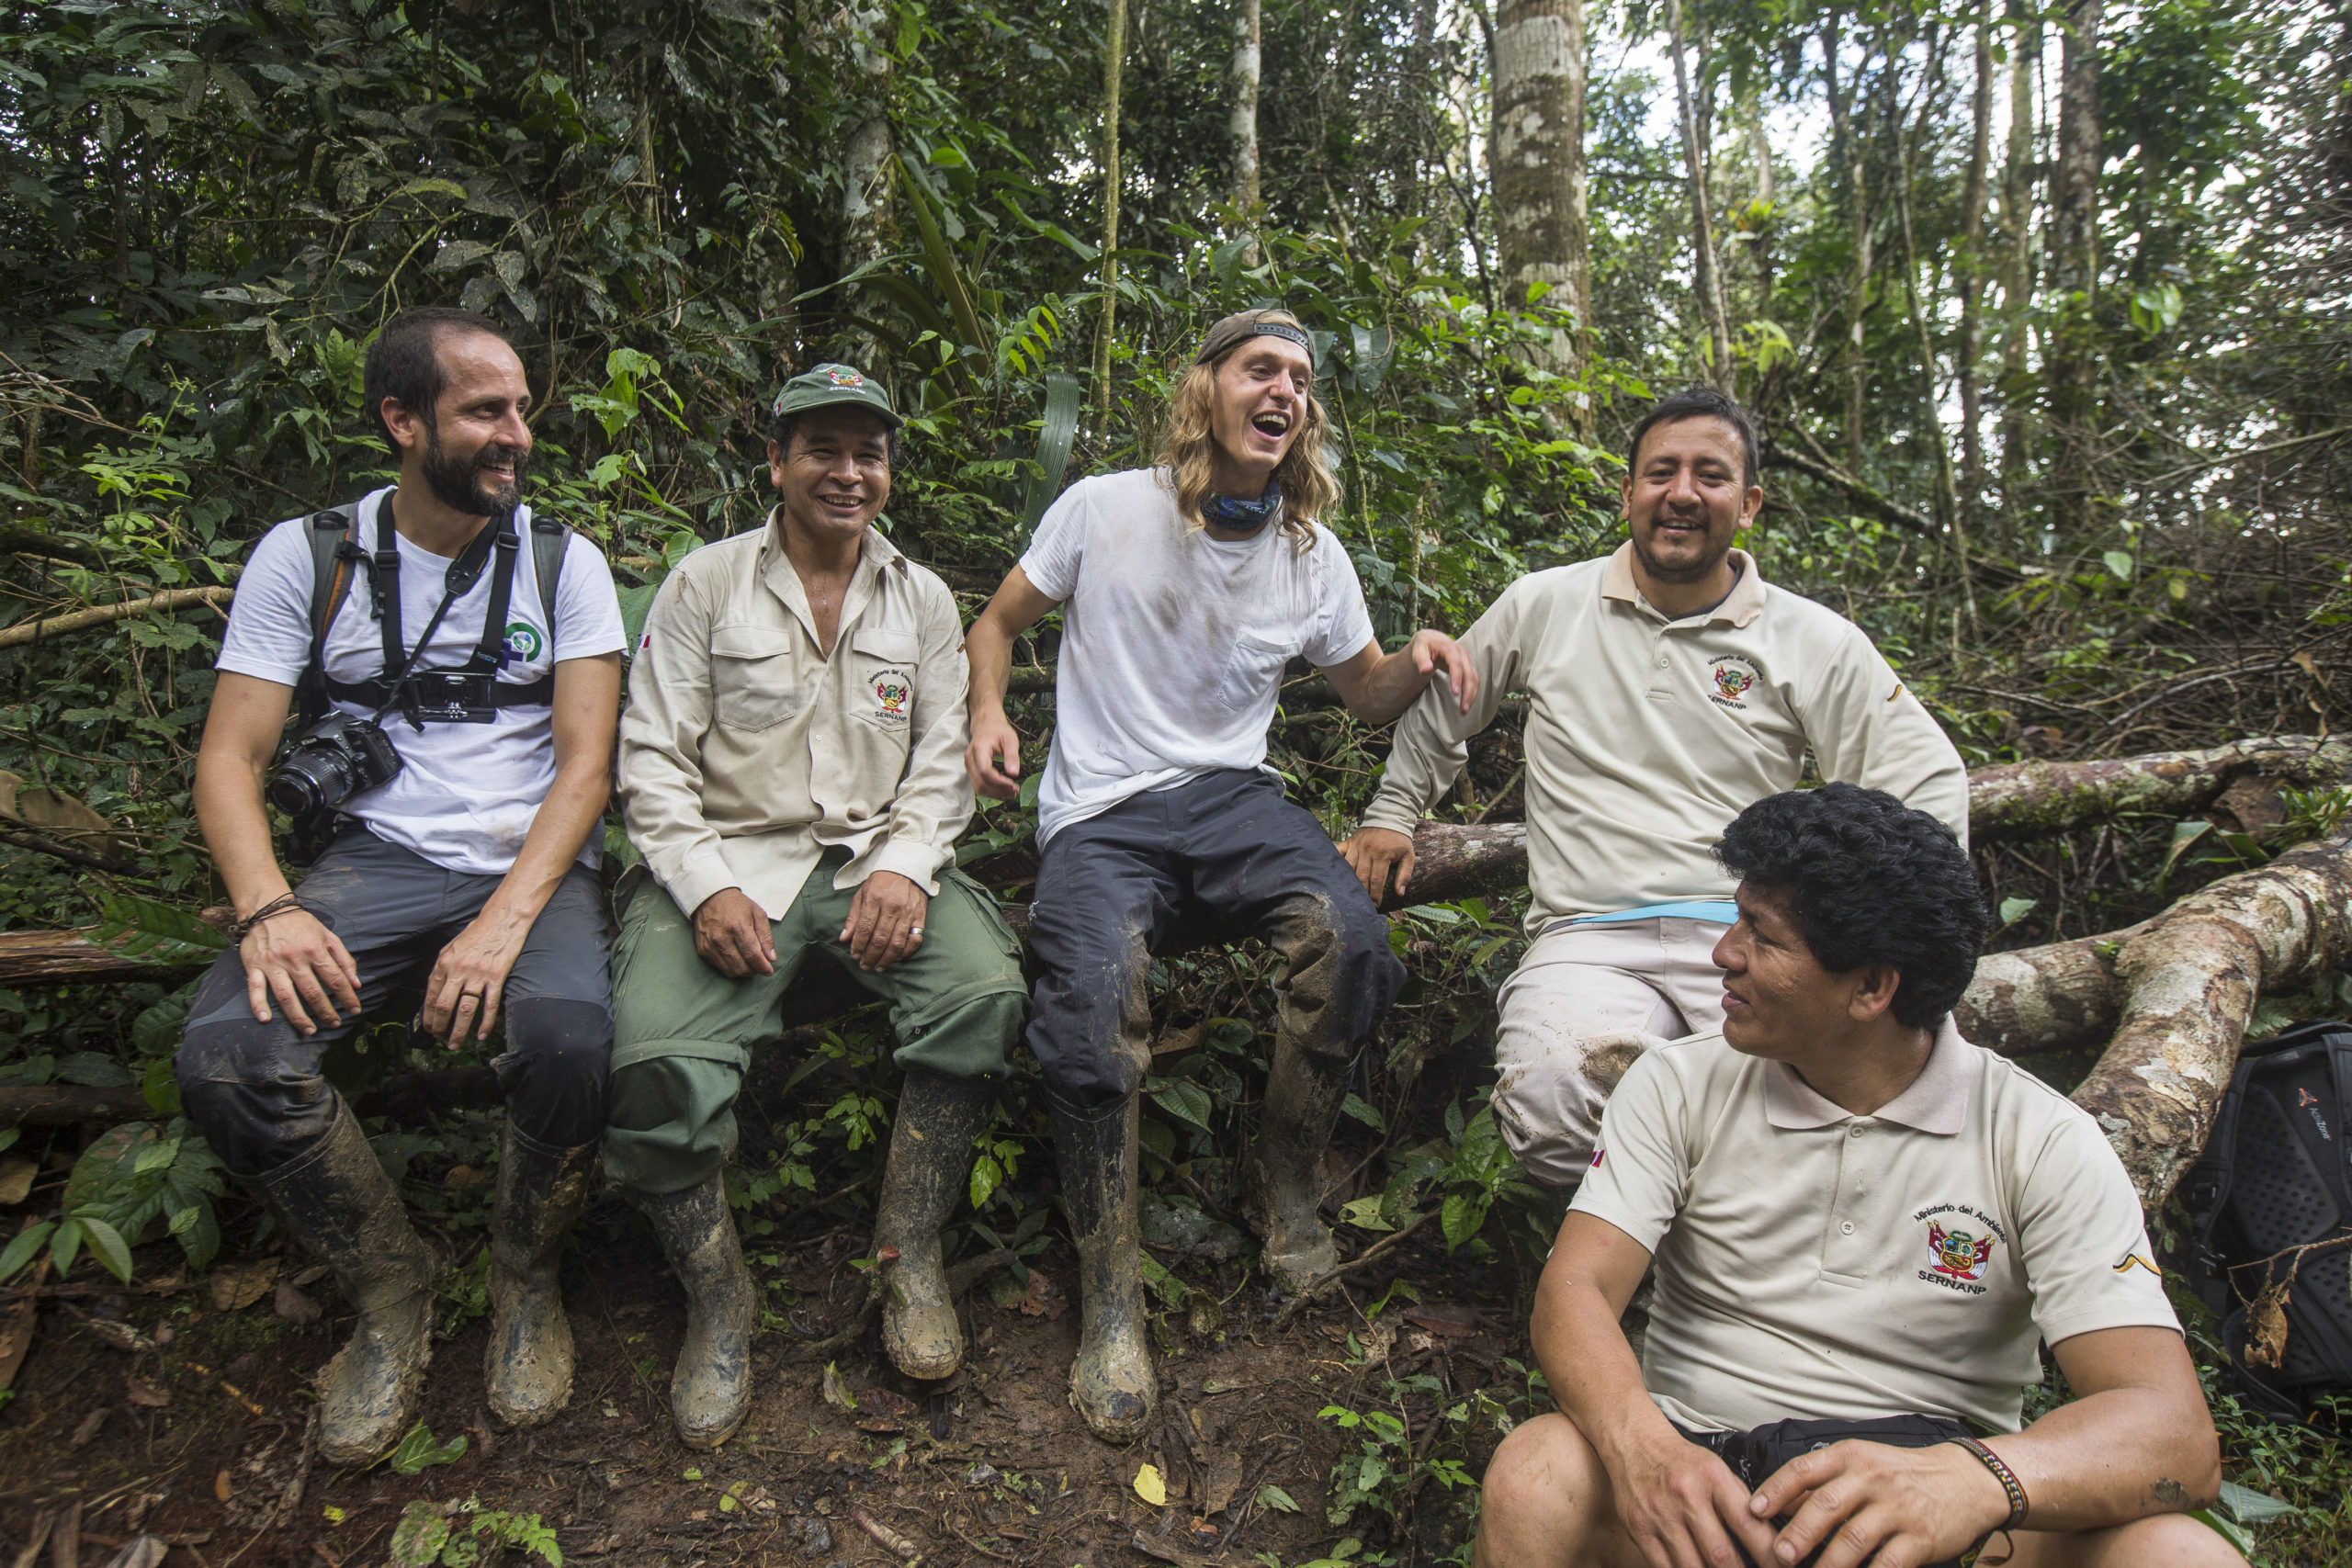 Client story: Nisolo goes trekking in the Peruvian Amazon